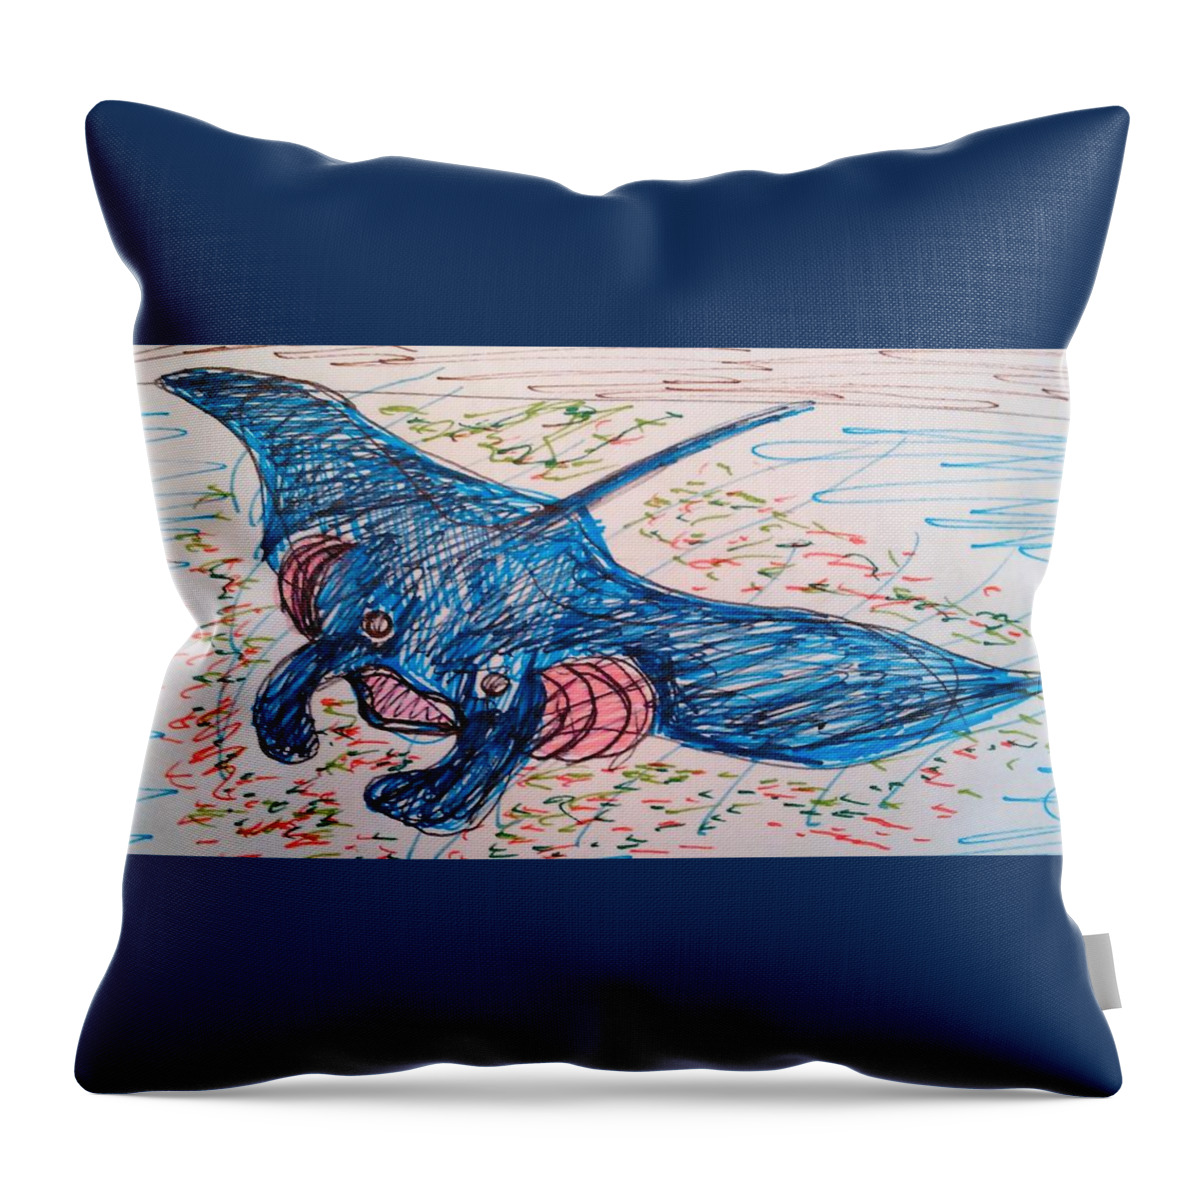 Manta Ray Throw Pillow featuring the drawing The Wise Manta by Andrew Blitman